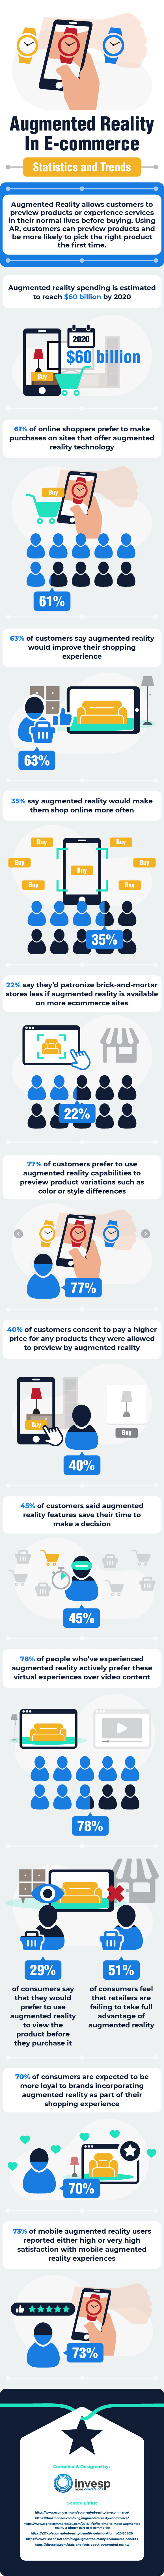 Infographic with stats on augmented reality trends in eCommerce.